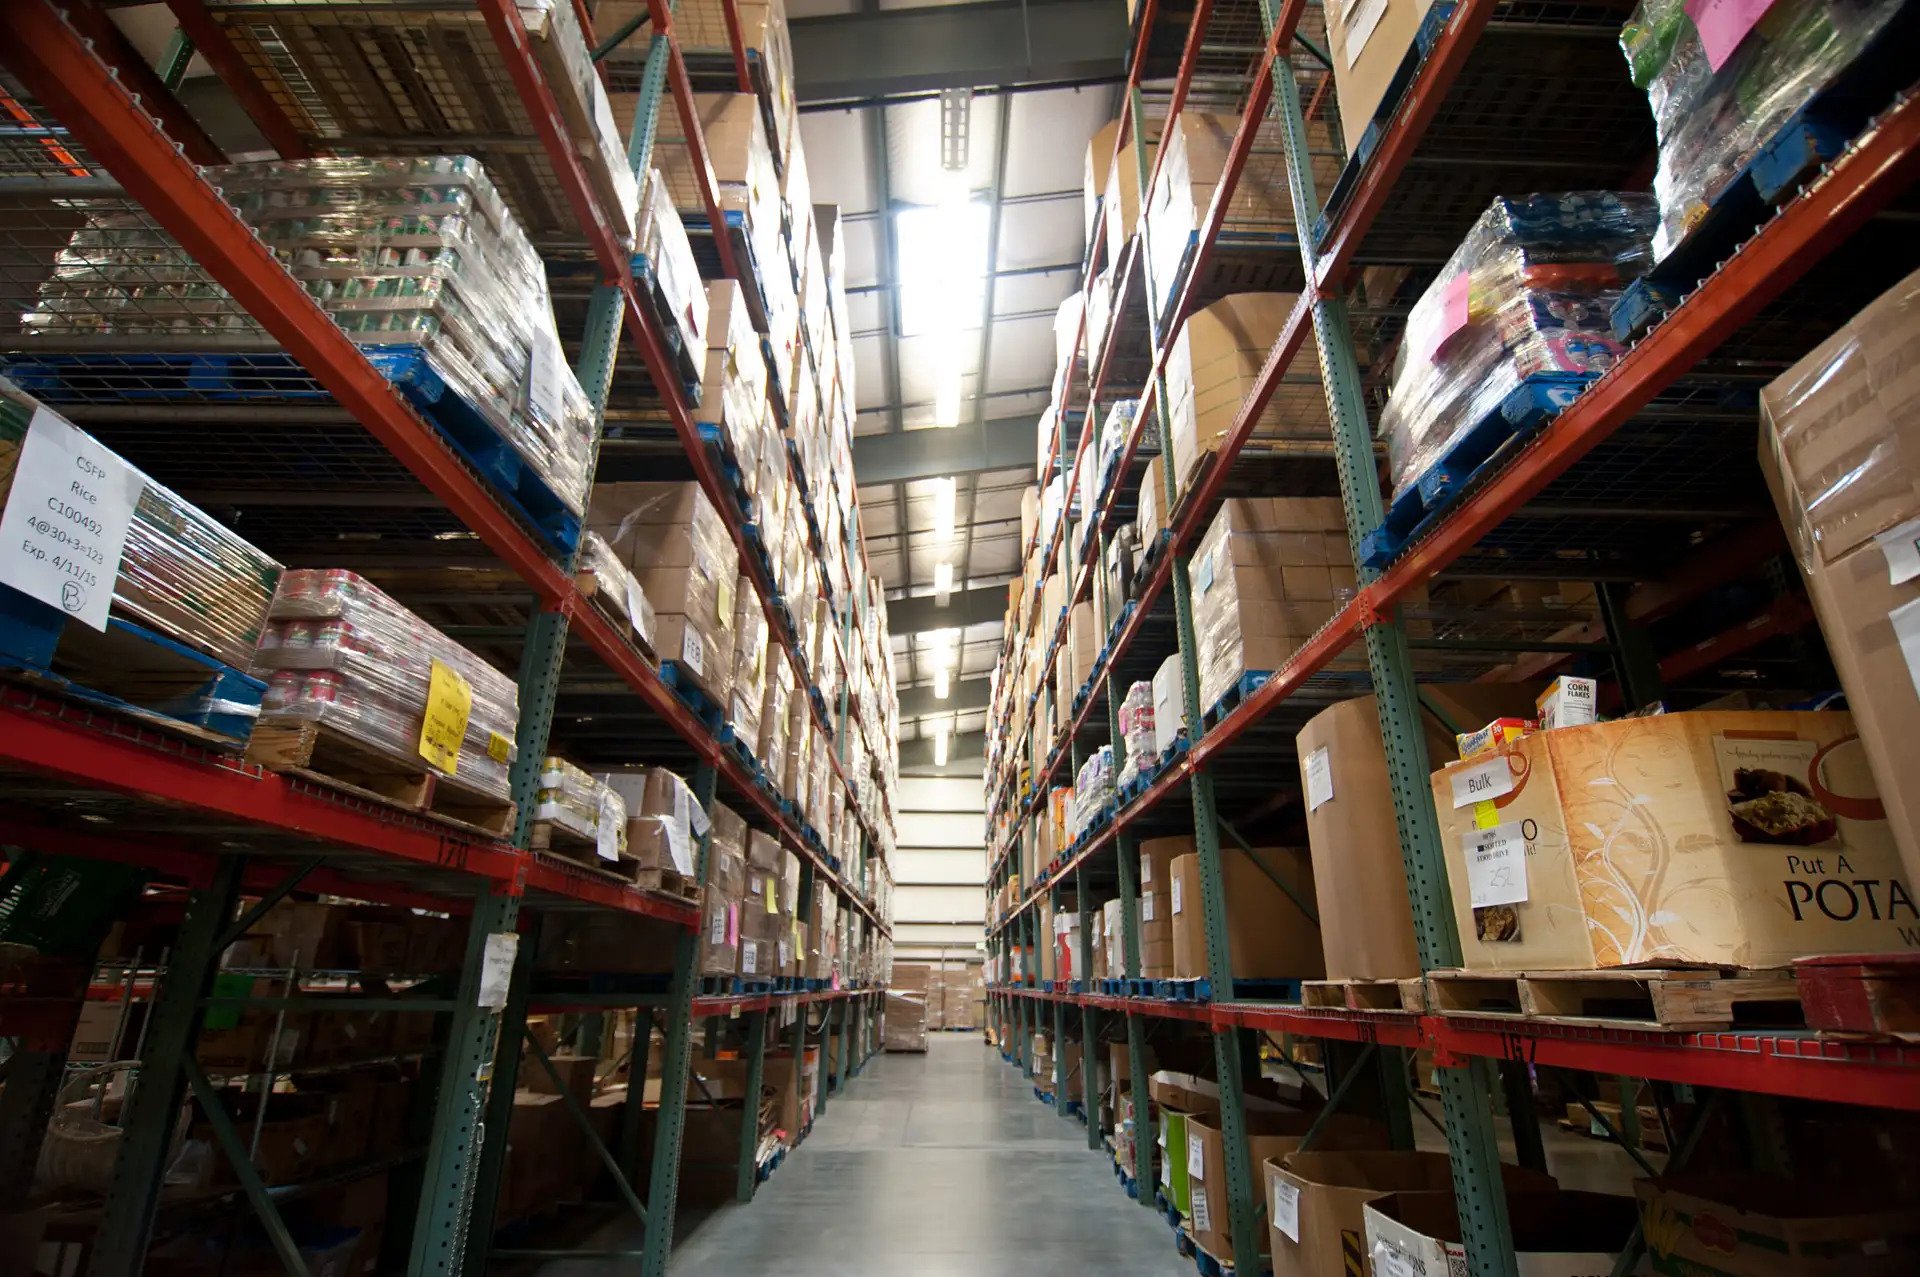 View down an aisle of a large distribution center